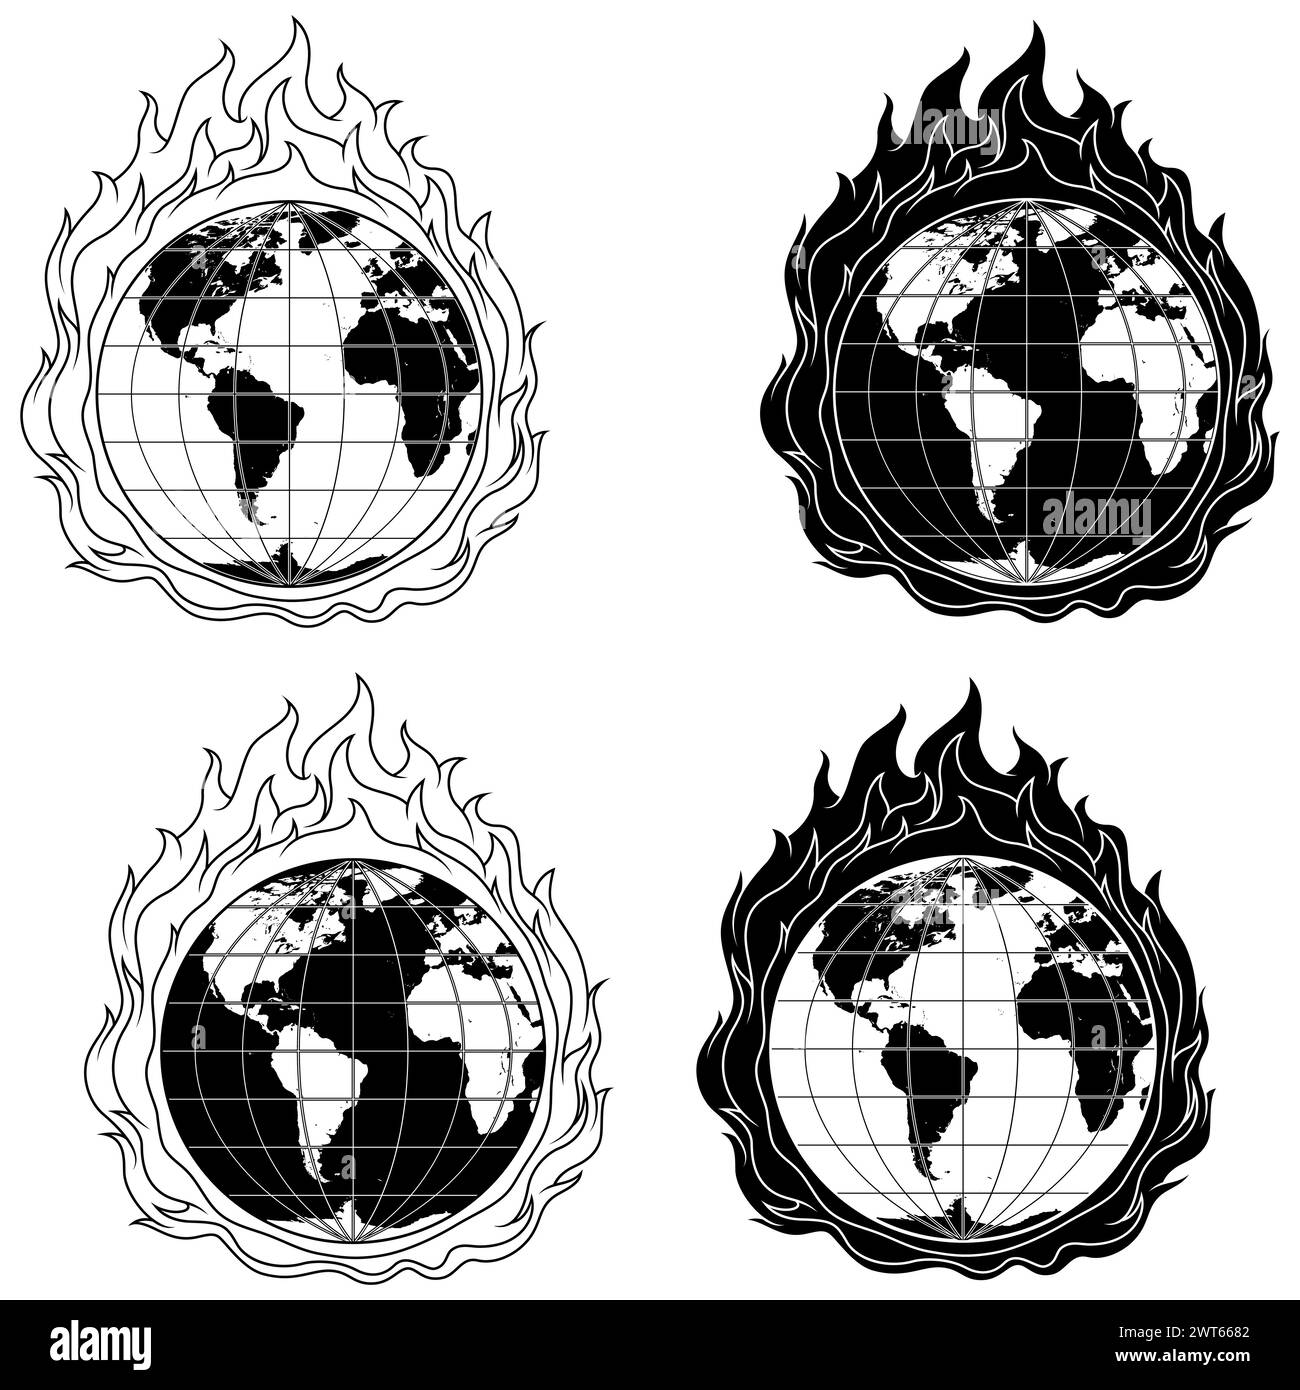 Vector design of the world under the effects of global warming Stock Vector